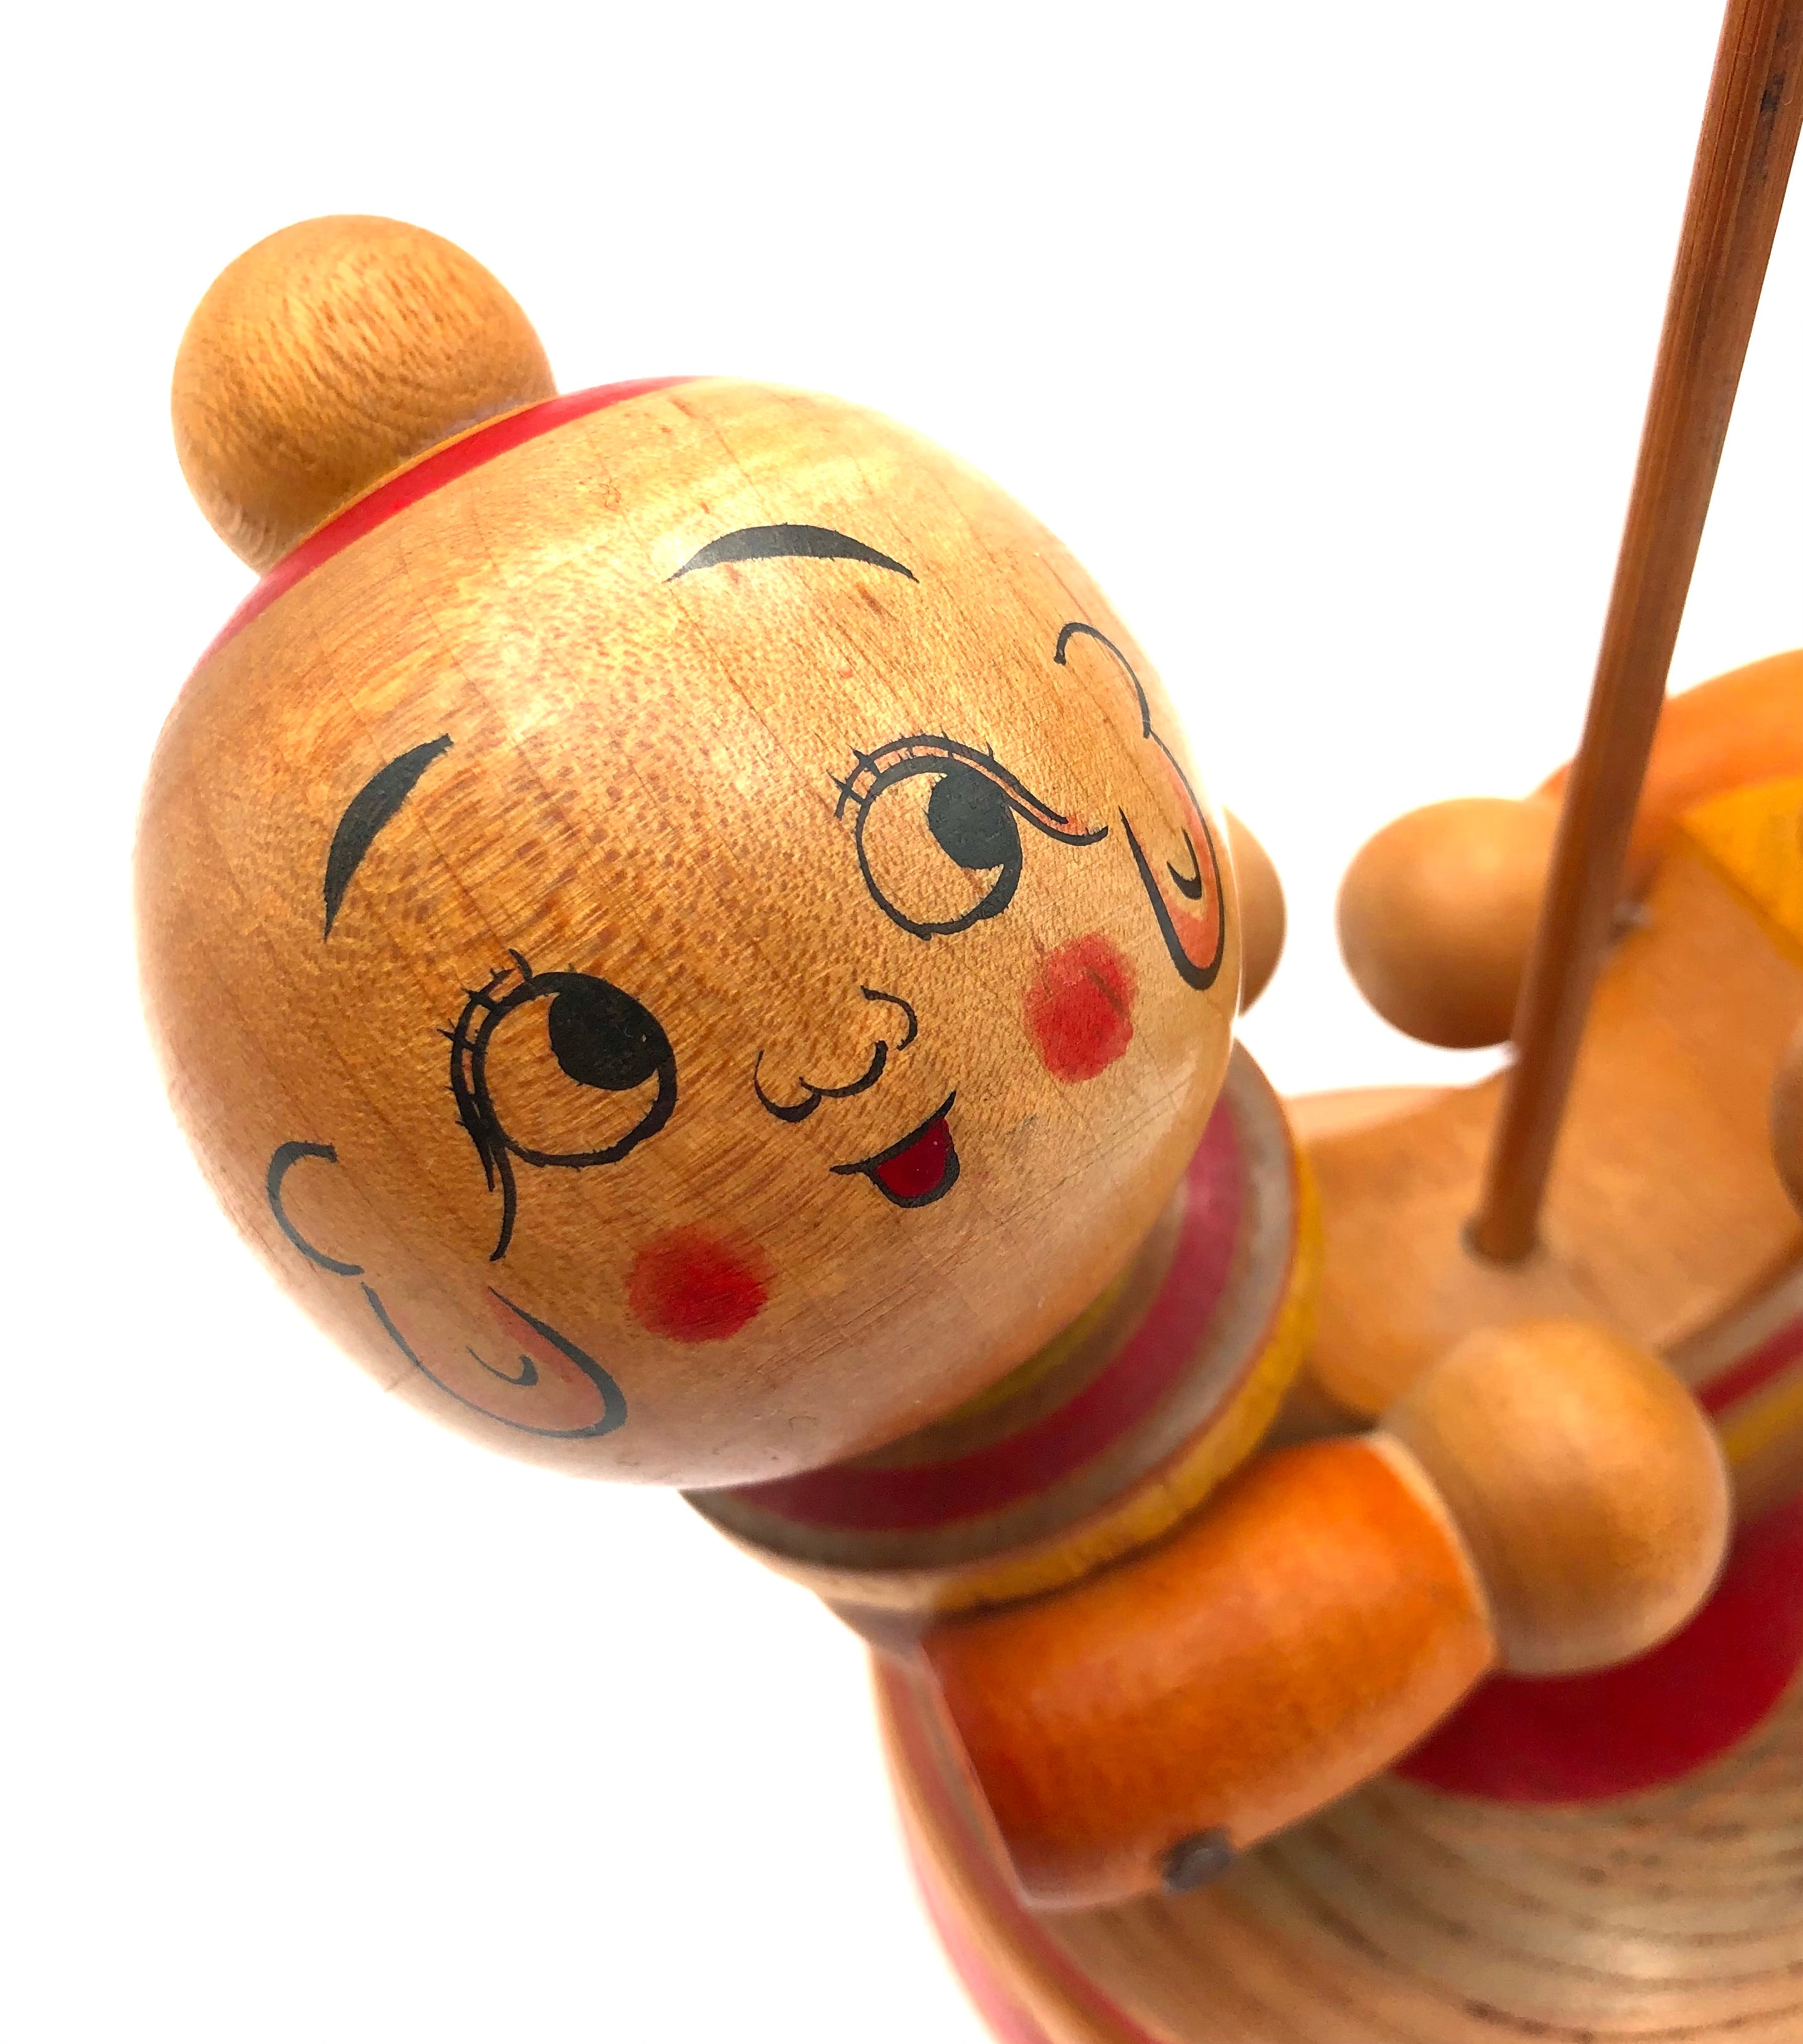 Vintage Japanese Clown Kokeshi Toy with Spinning Top by Tsuta, Mamoru (1928-2009)